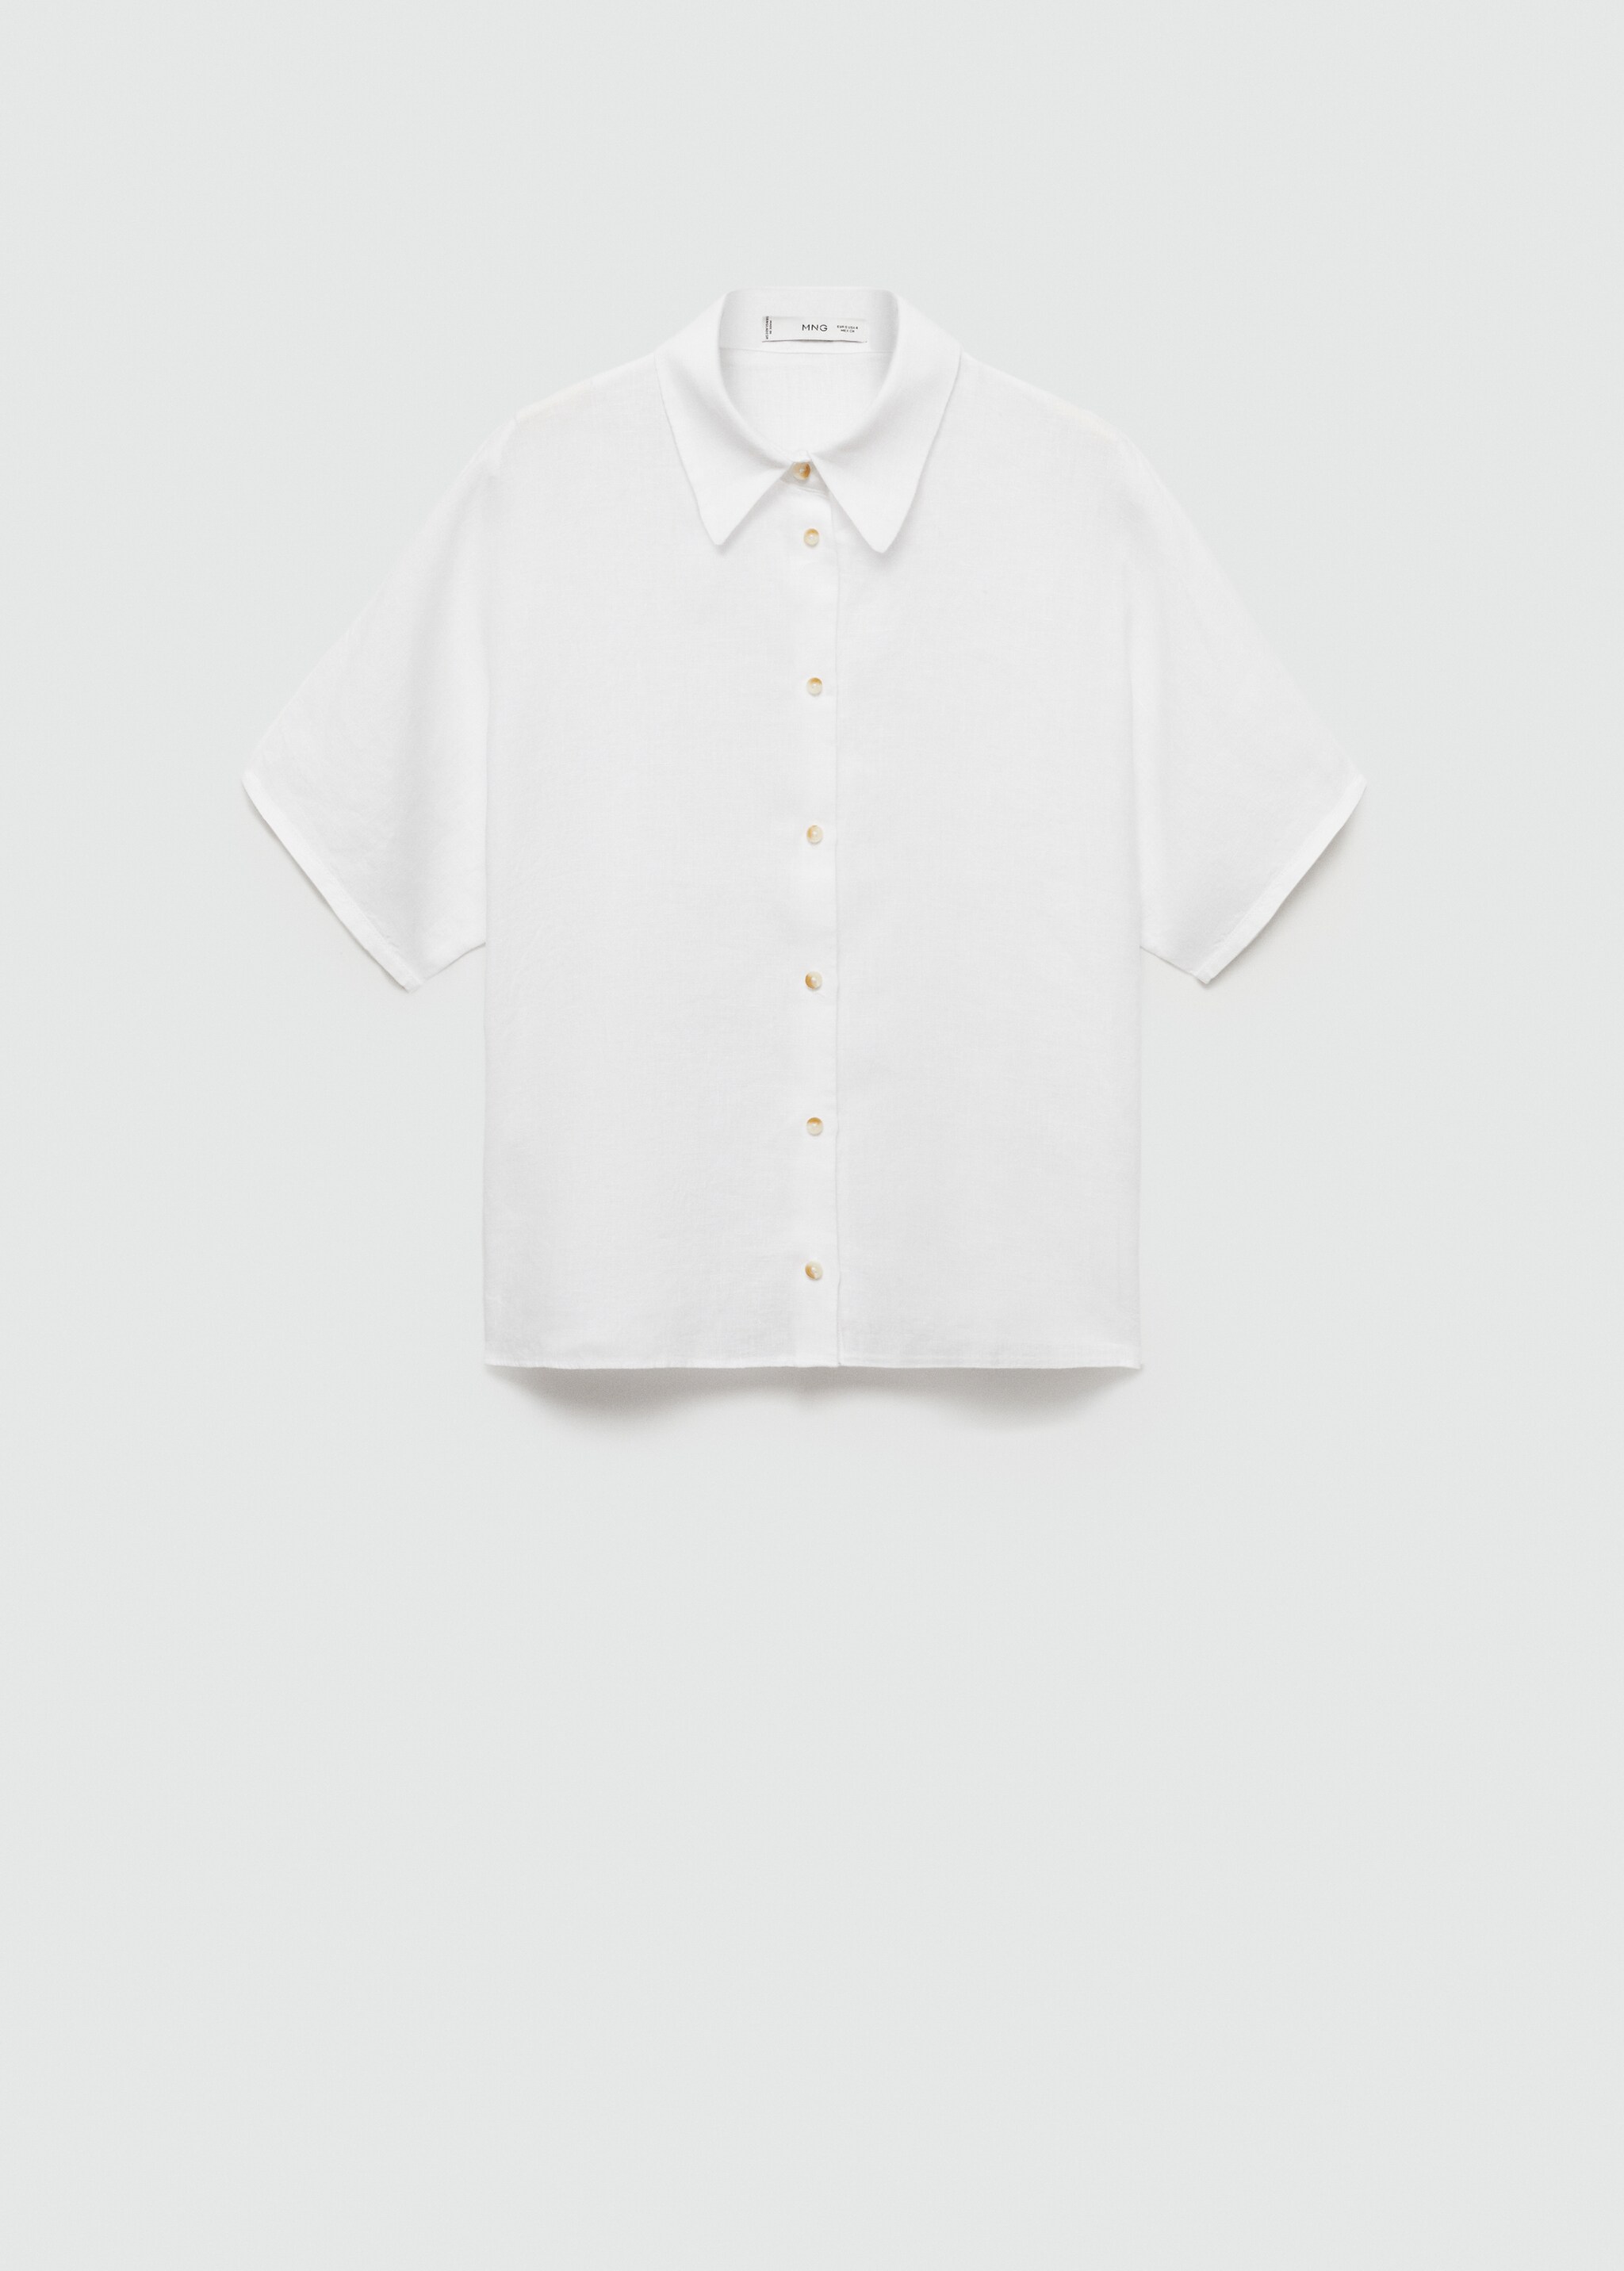 Linen 100% shirt - Article without model